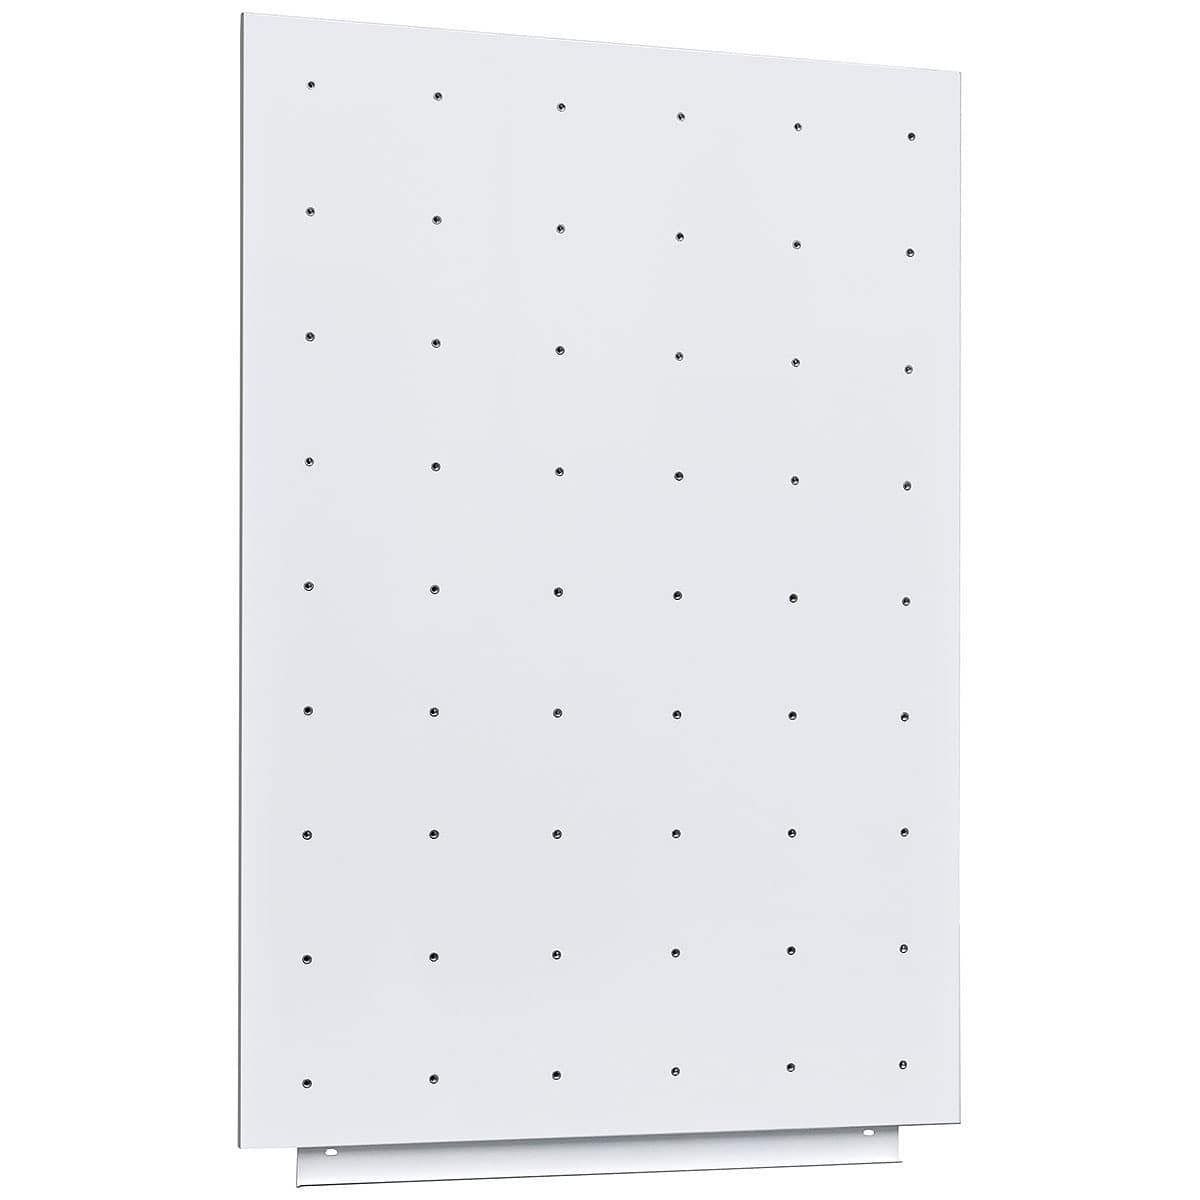 PegWall – Tool wall, magnetic